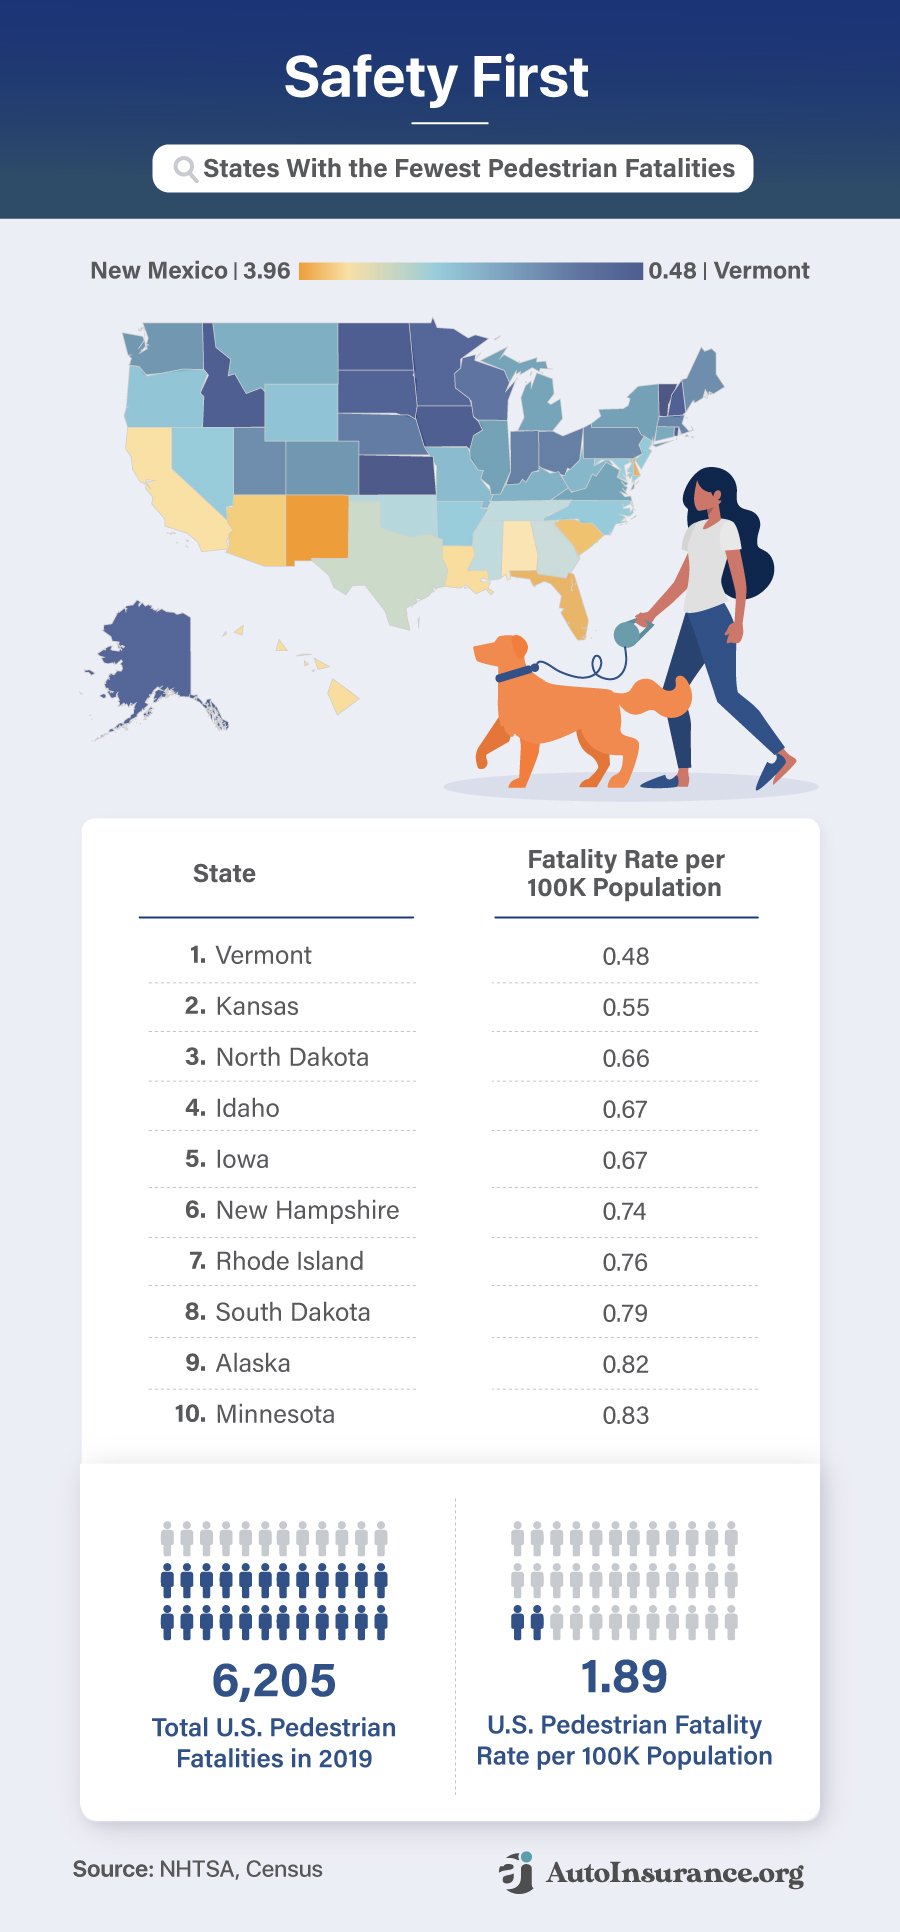 States with the fewest pedestrian fatalities